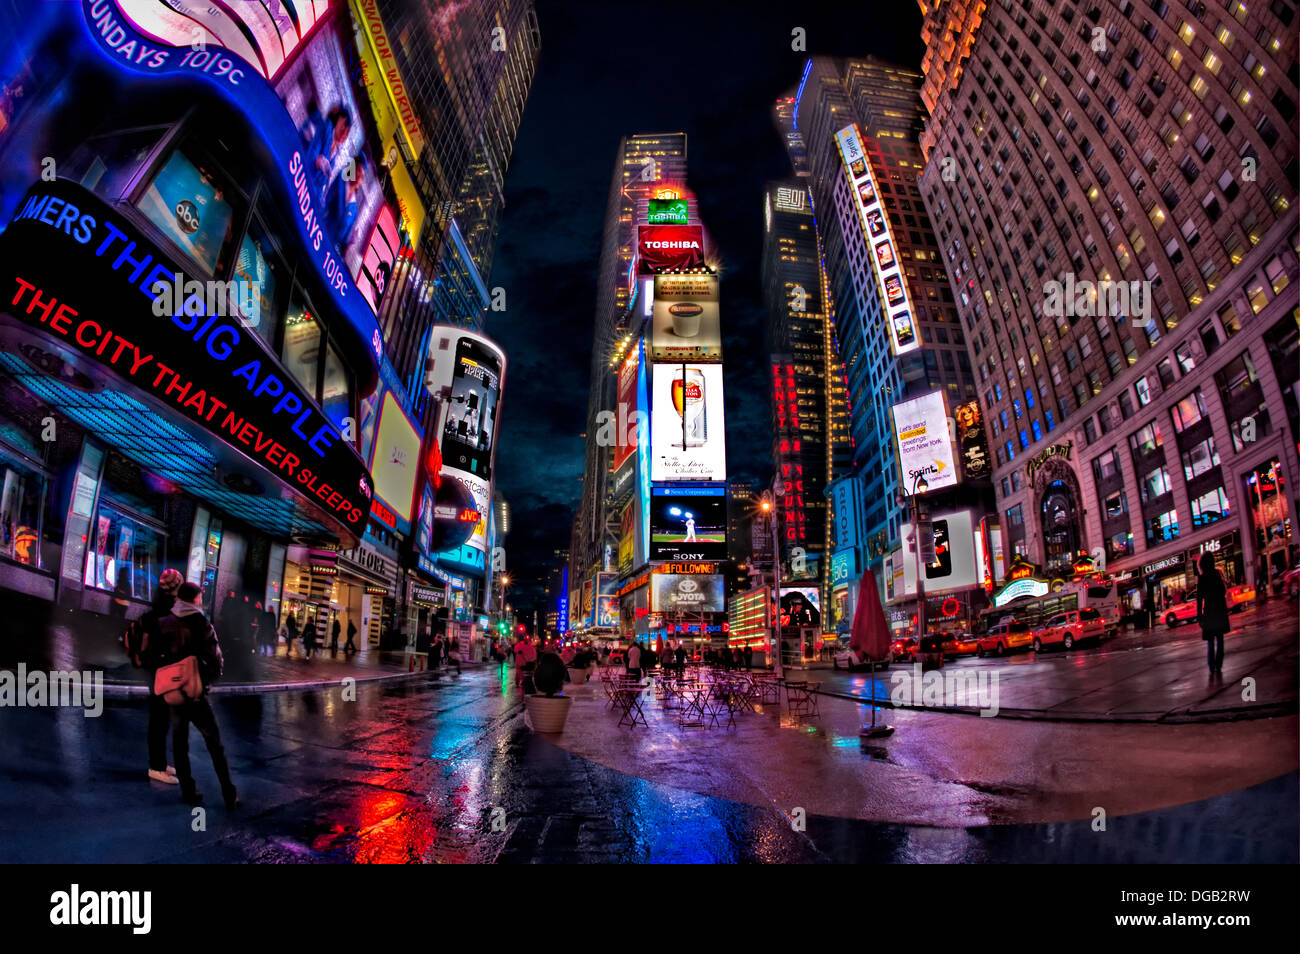 New York City's famous Times Square at night after a rainfall. Stock Photo